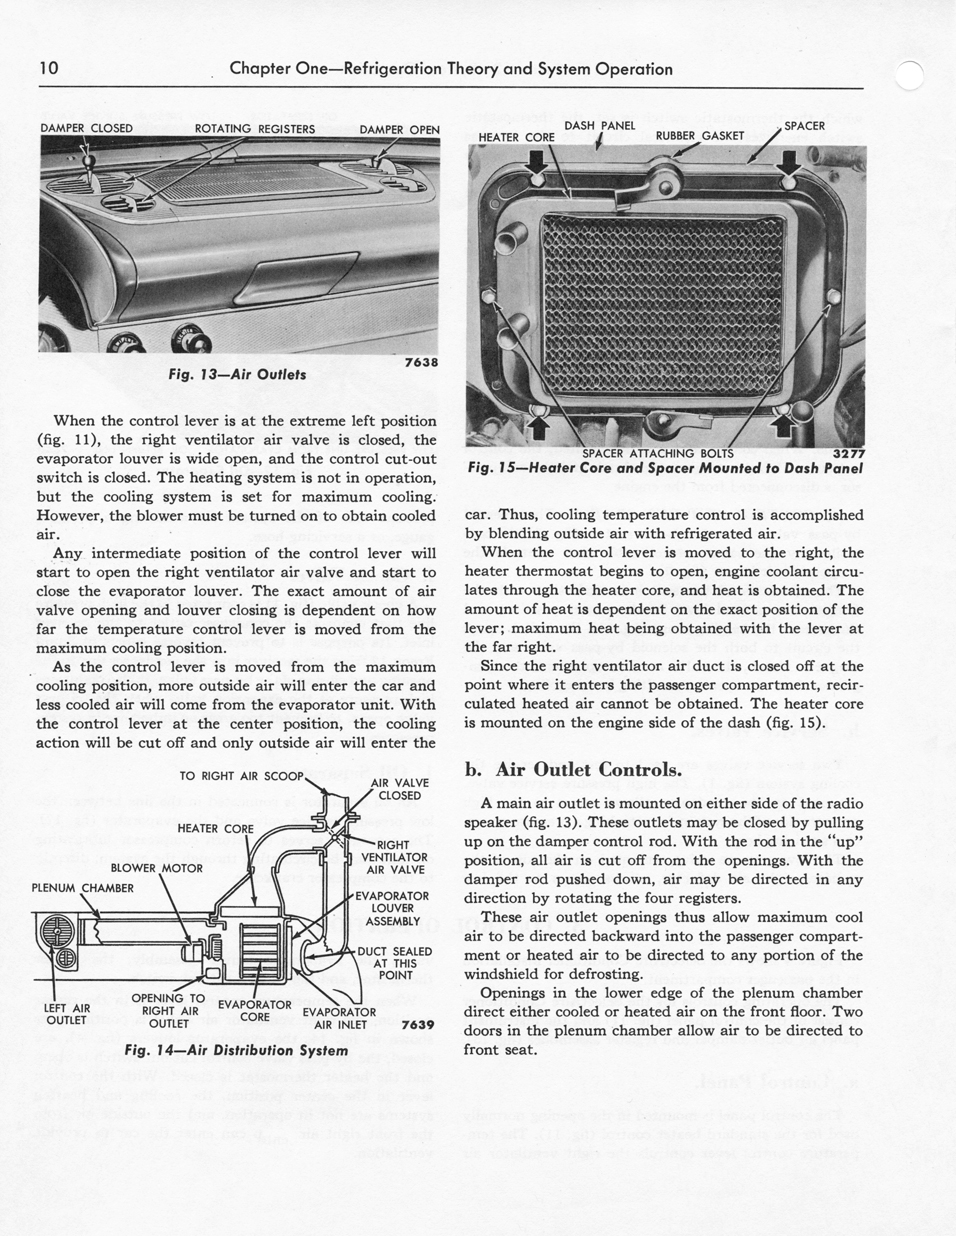 1956 Ford Car Air Conditioning Shop Manual Page 10 - "SelectAire Conditioner"